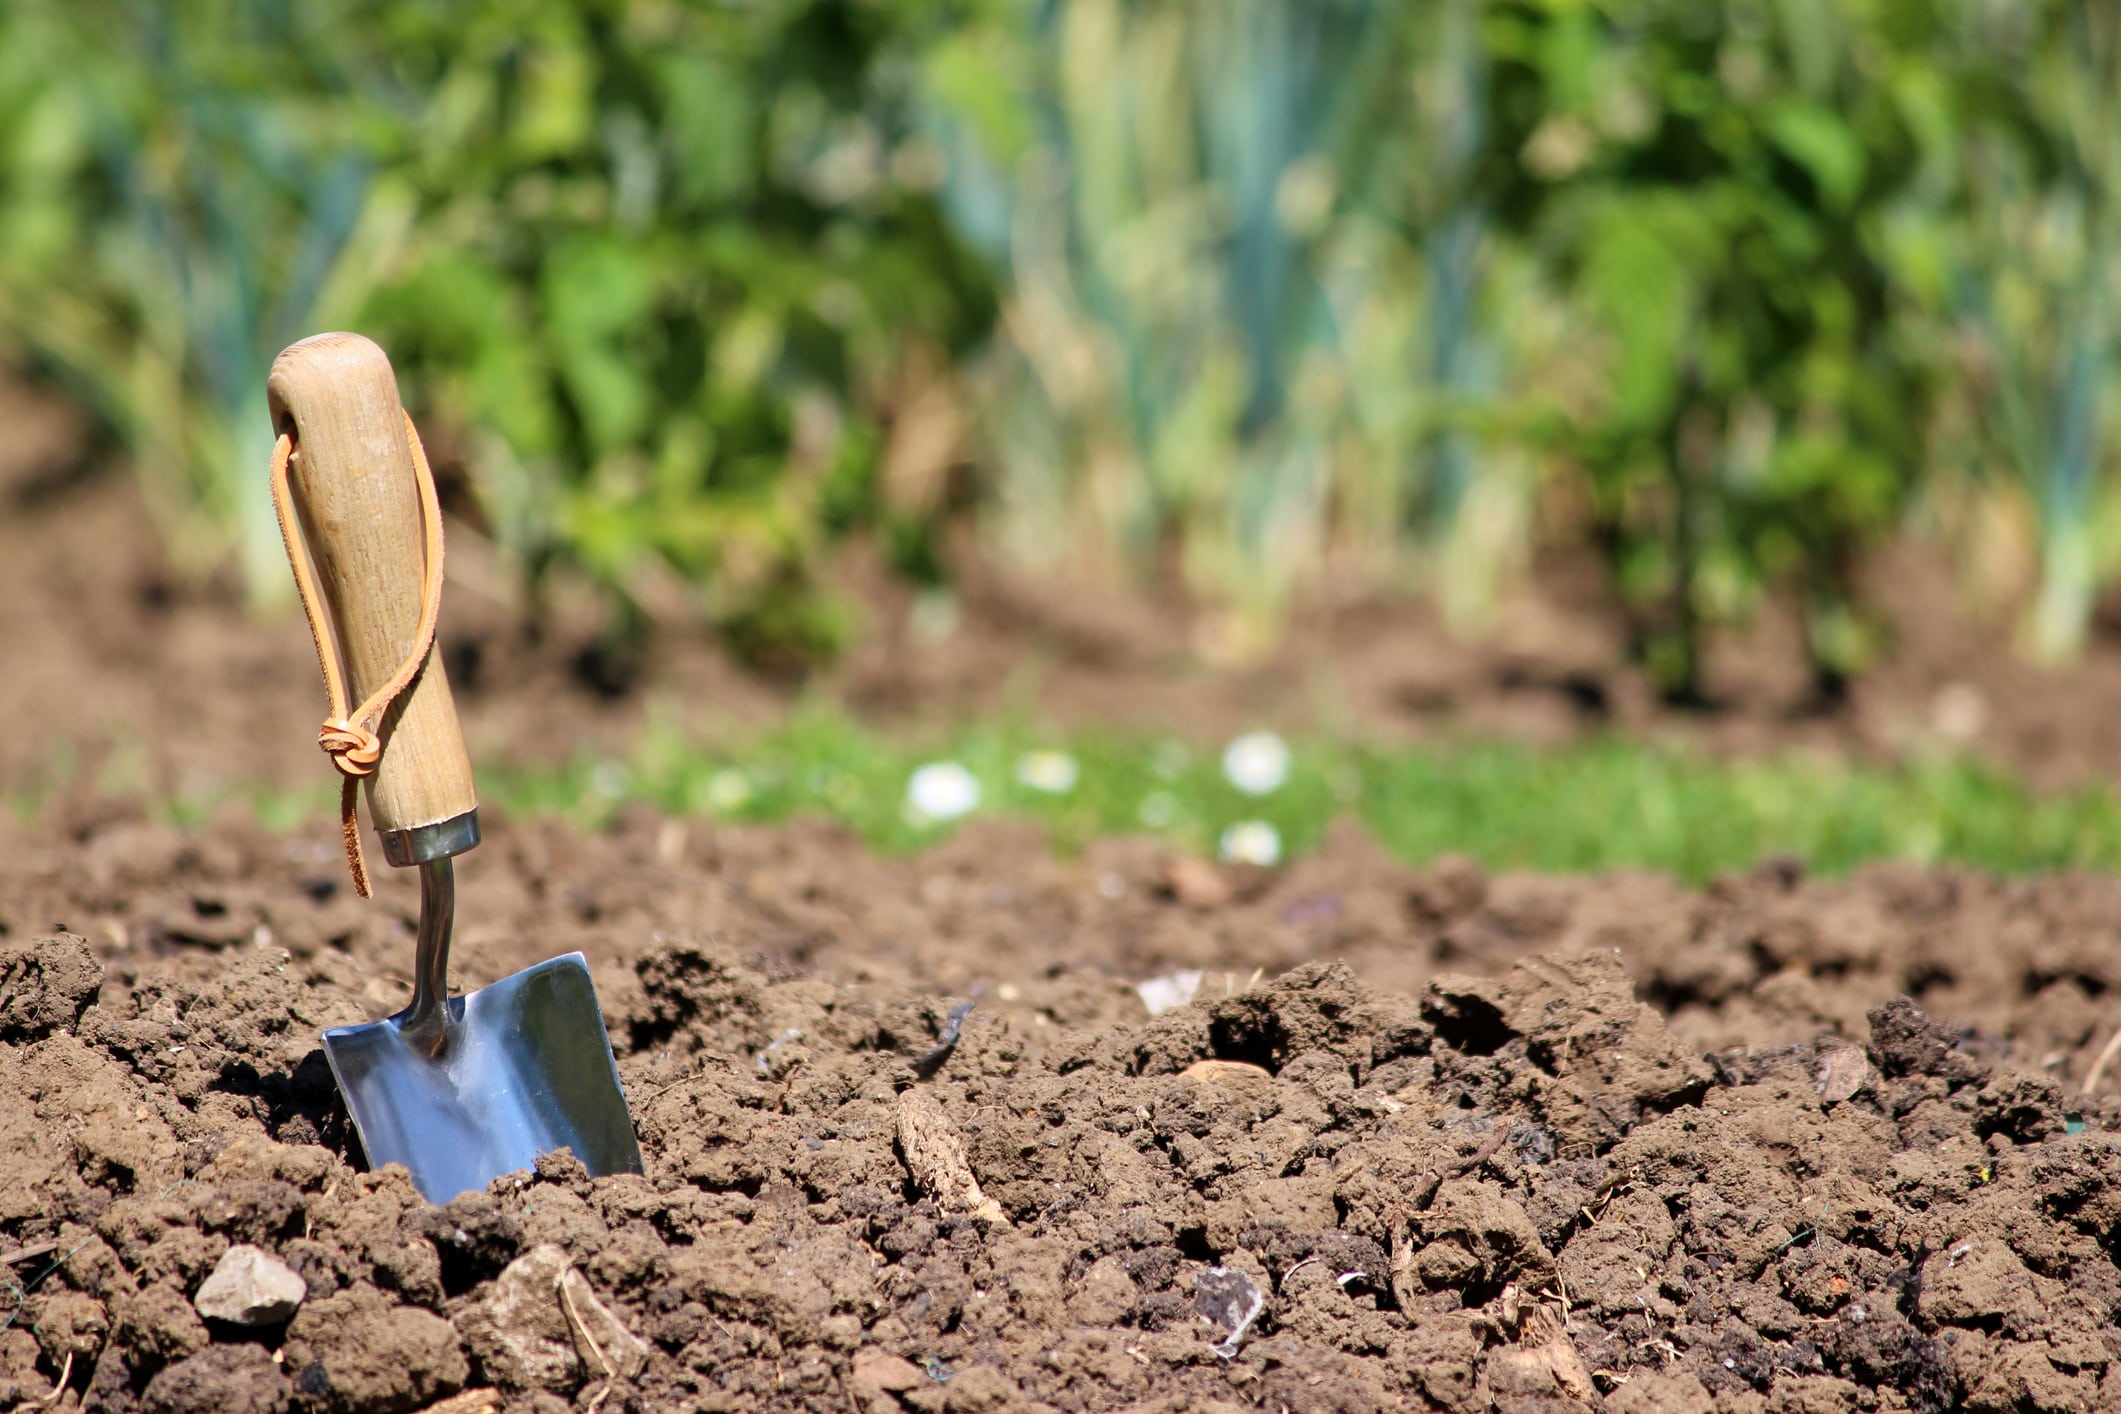 Photo showing a stainless steel hand trowel with a wooden handle, pictured in a vegetable garden allotment plot, ready for an afternoon of planting in this bare patch of soil. A lawn pathway can be seen in the background, along with onions and runner bean plants.